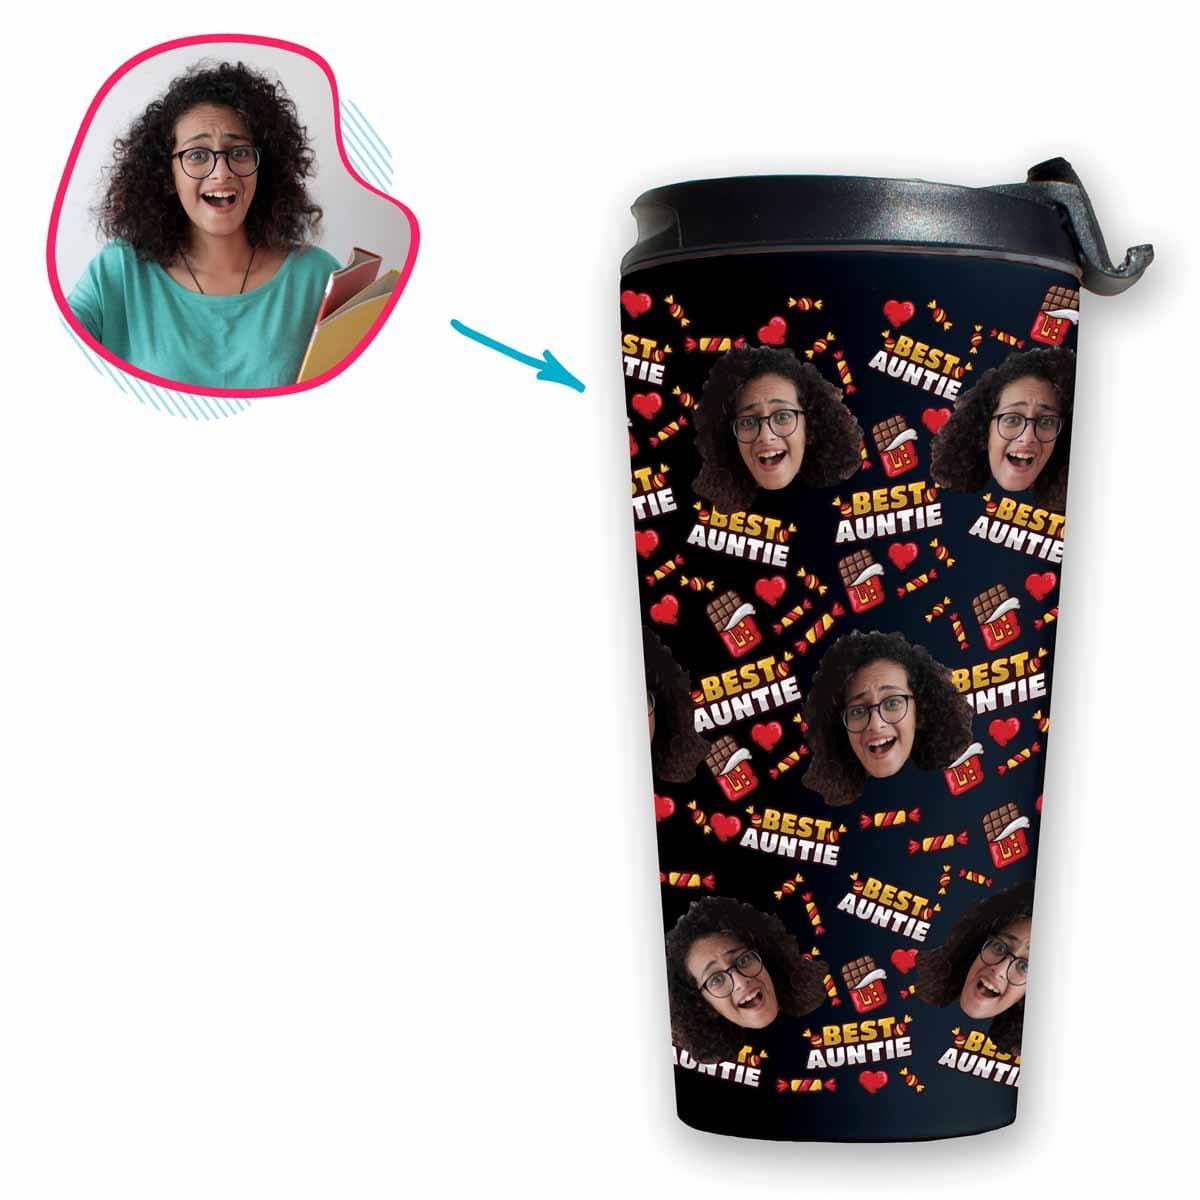 Dark Auntie personalized travel mug with photo of face printed on it